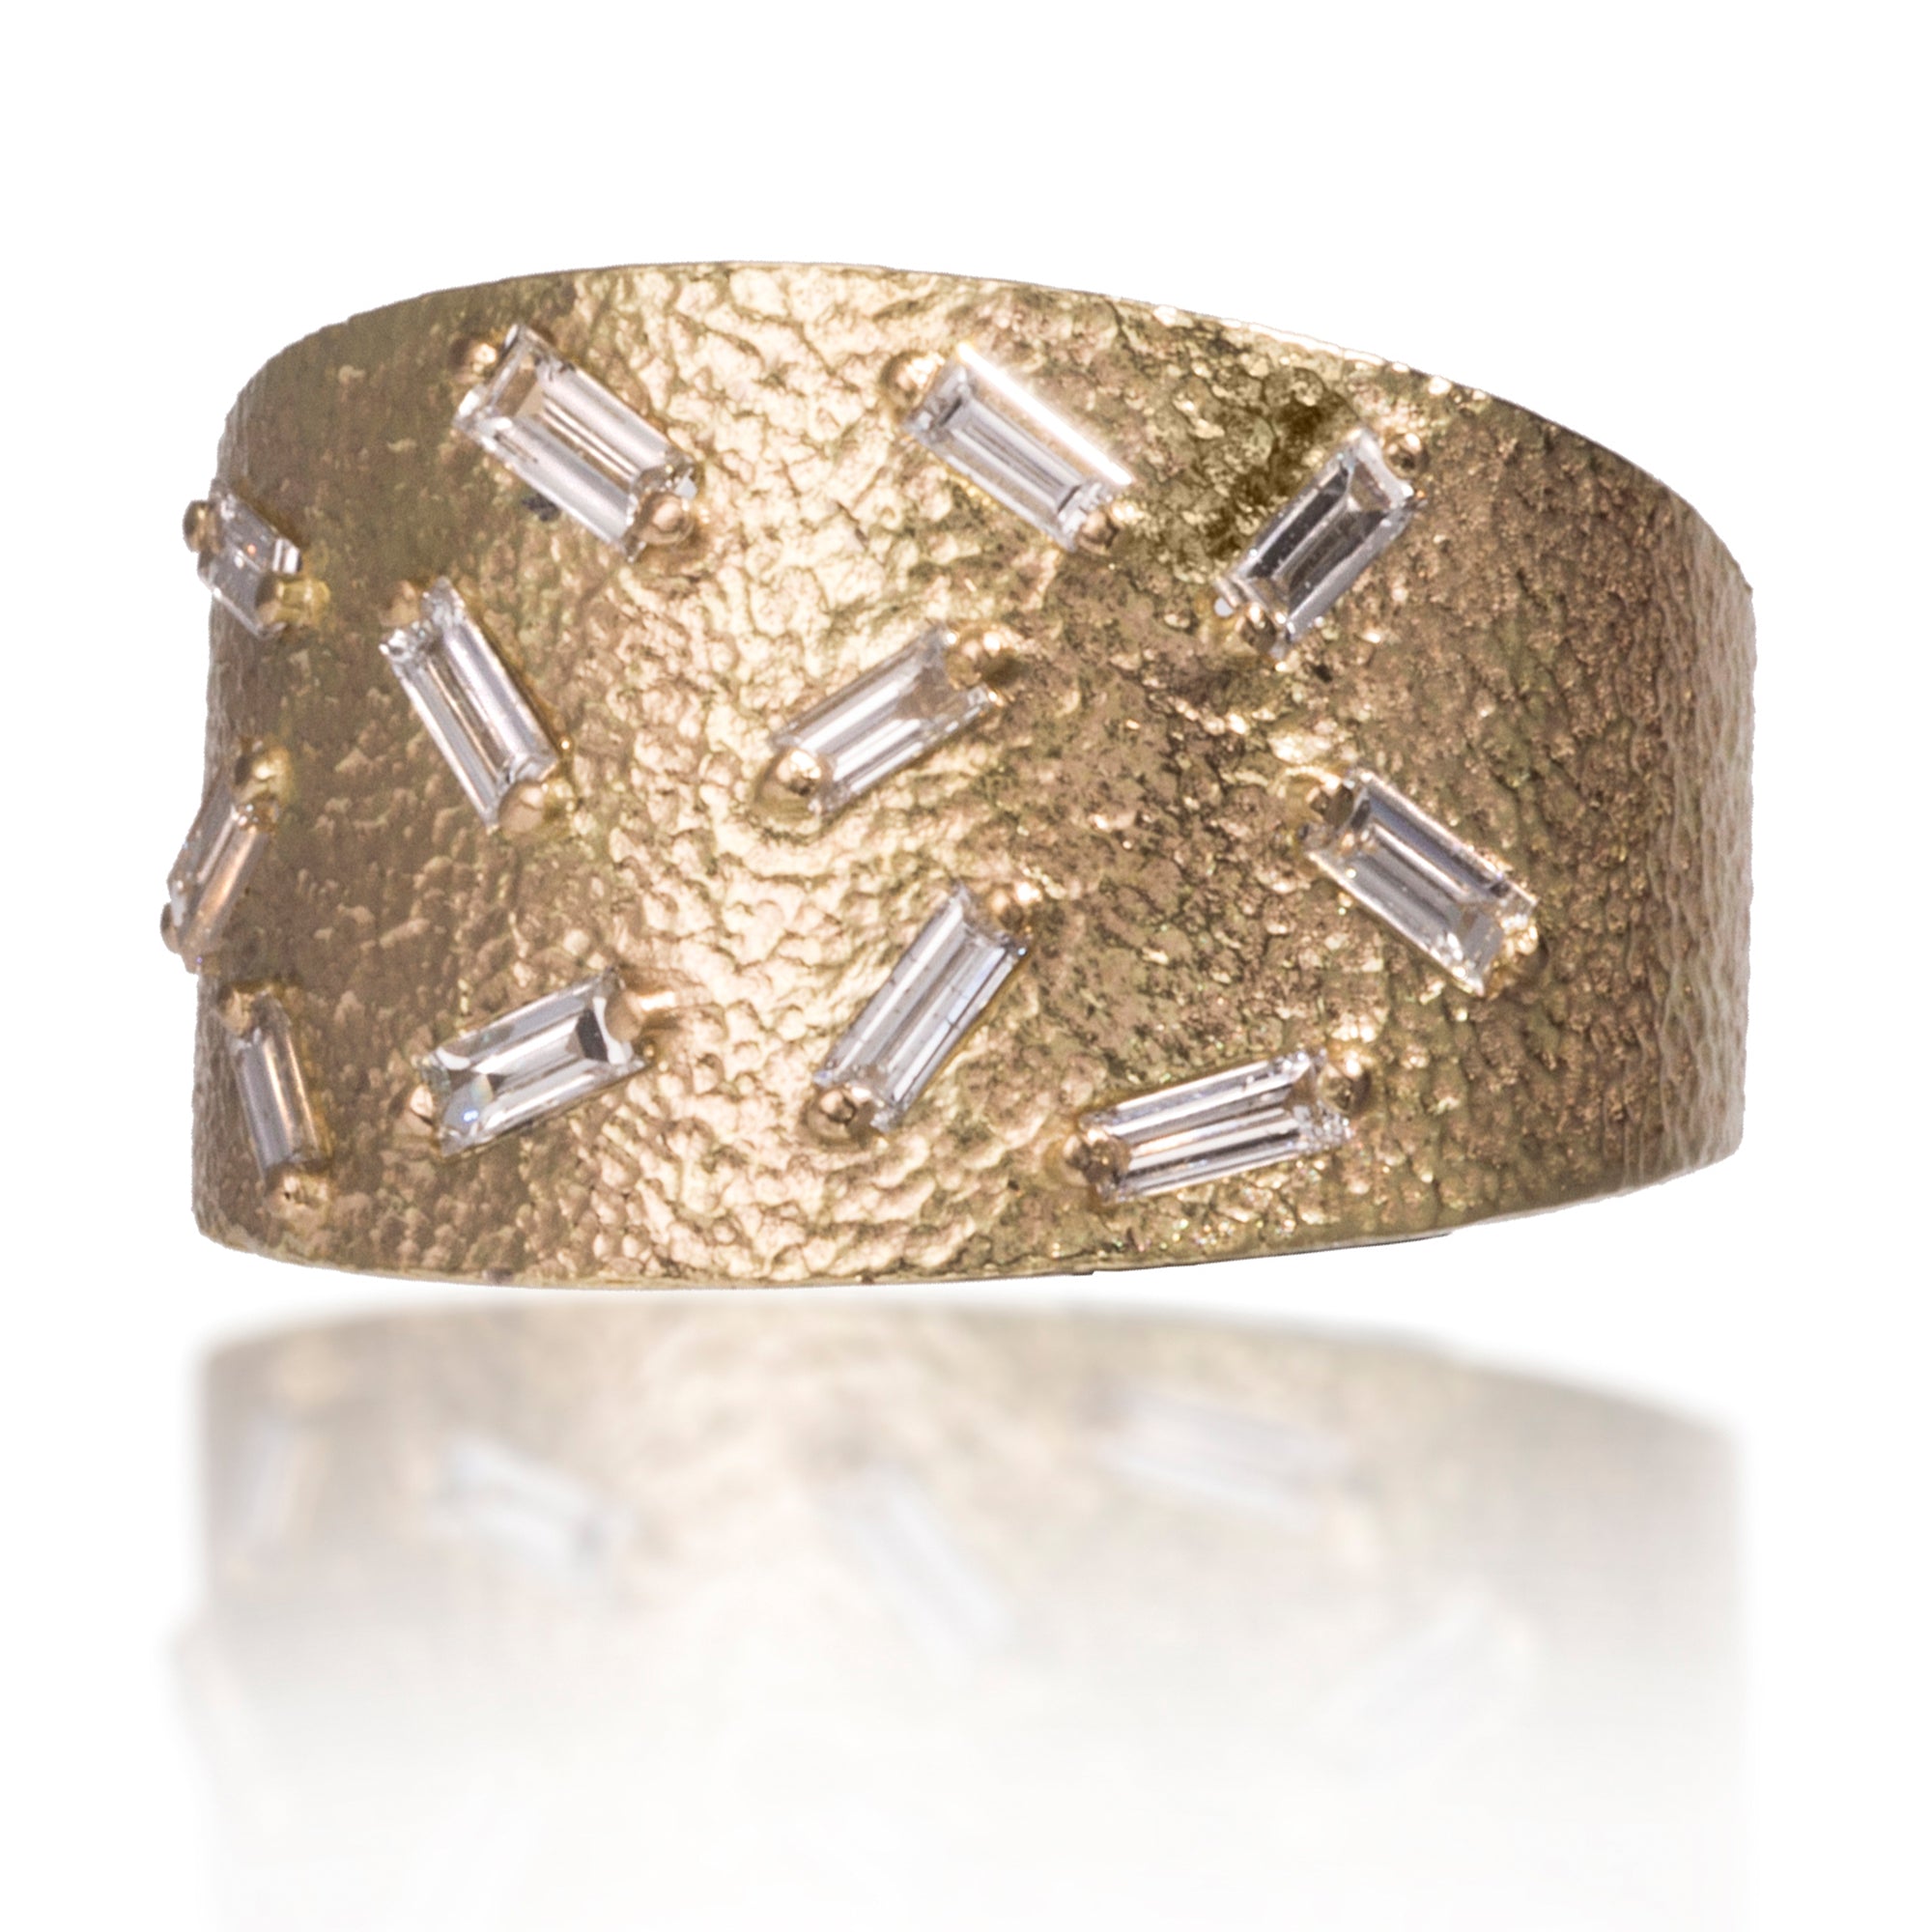 This medium width cigar band style ring is set with 12 white diamond baguettes. It is available in three richly textured color ways, oxidized silver, 18k gold, and palladium. Makes a beautiful bridal alternative. 0.4023 tcw. 